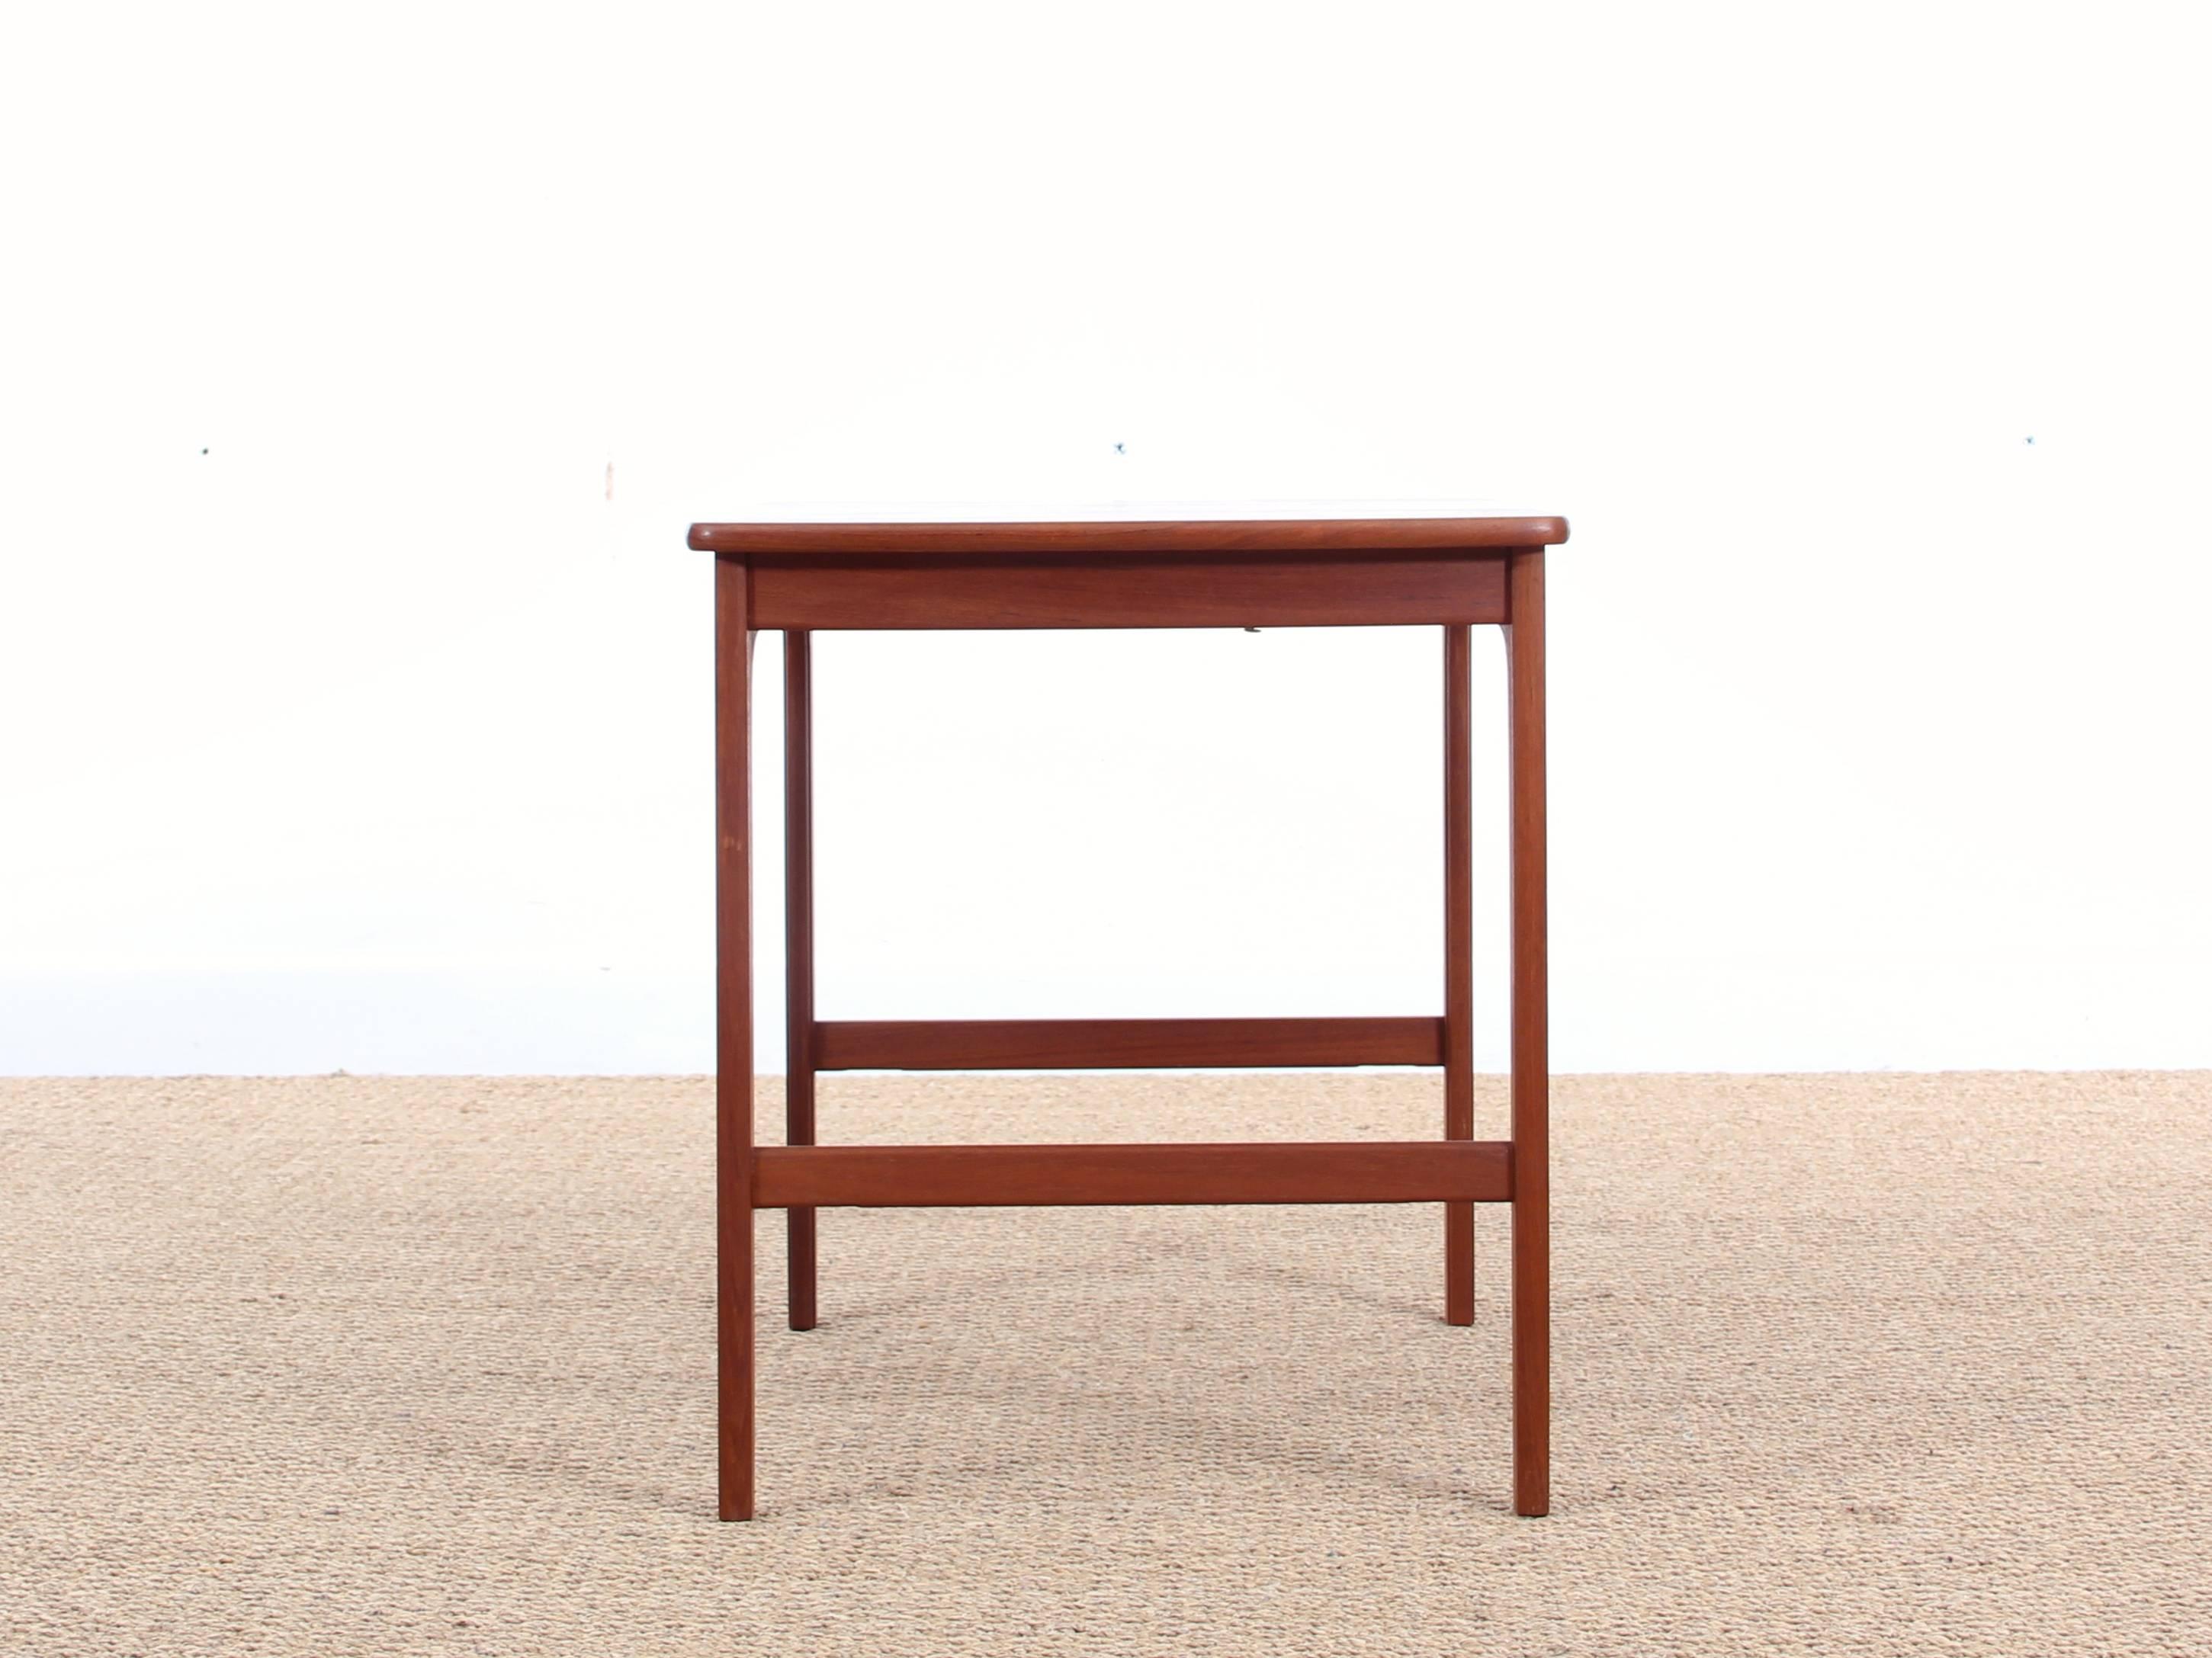 Scandinavian side table in solid teak by Yngvar Sandstro¨m for Swedish carpenter AB Seffle Mo¨belfabrik. Apparent assembly system in beech.